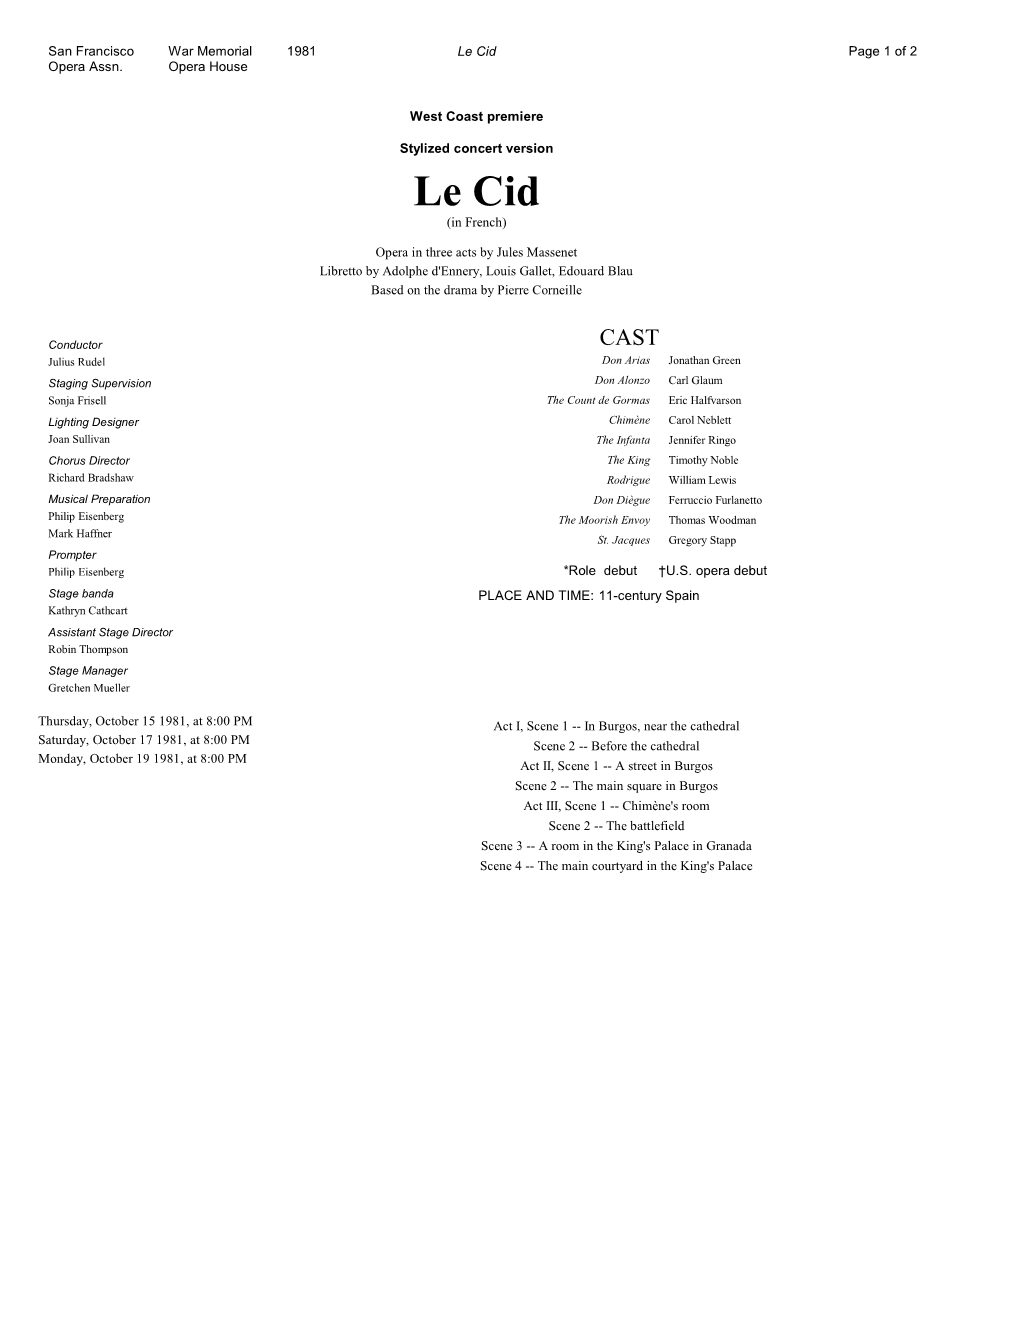 Le Cid Page 1 of 2 Opera Assn